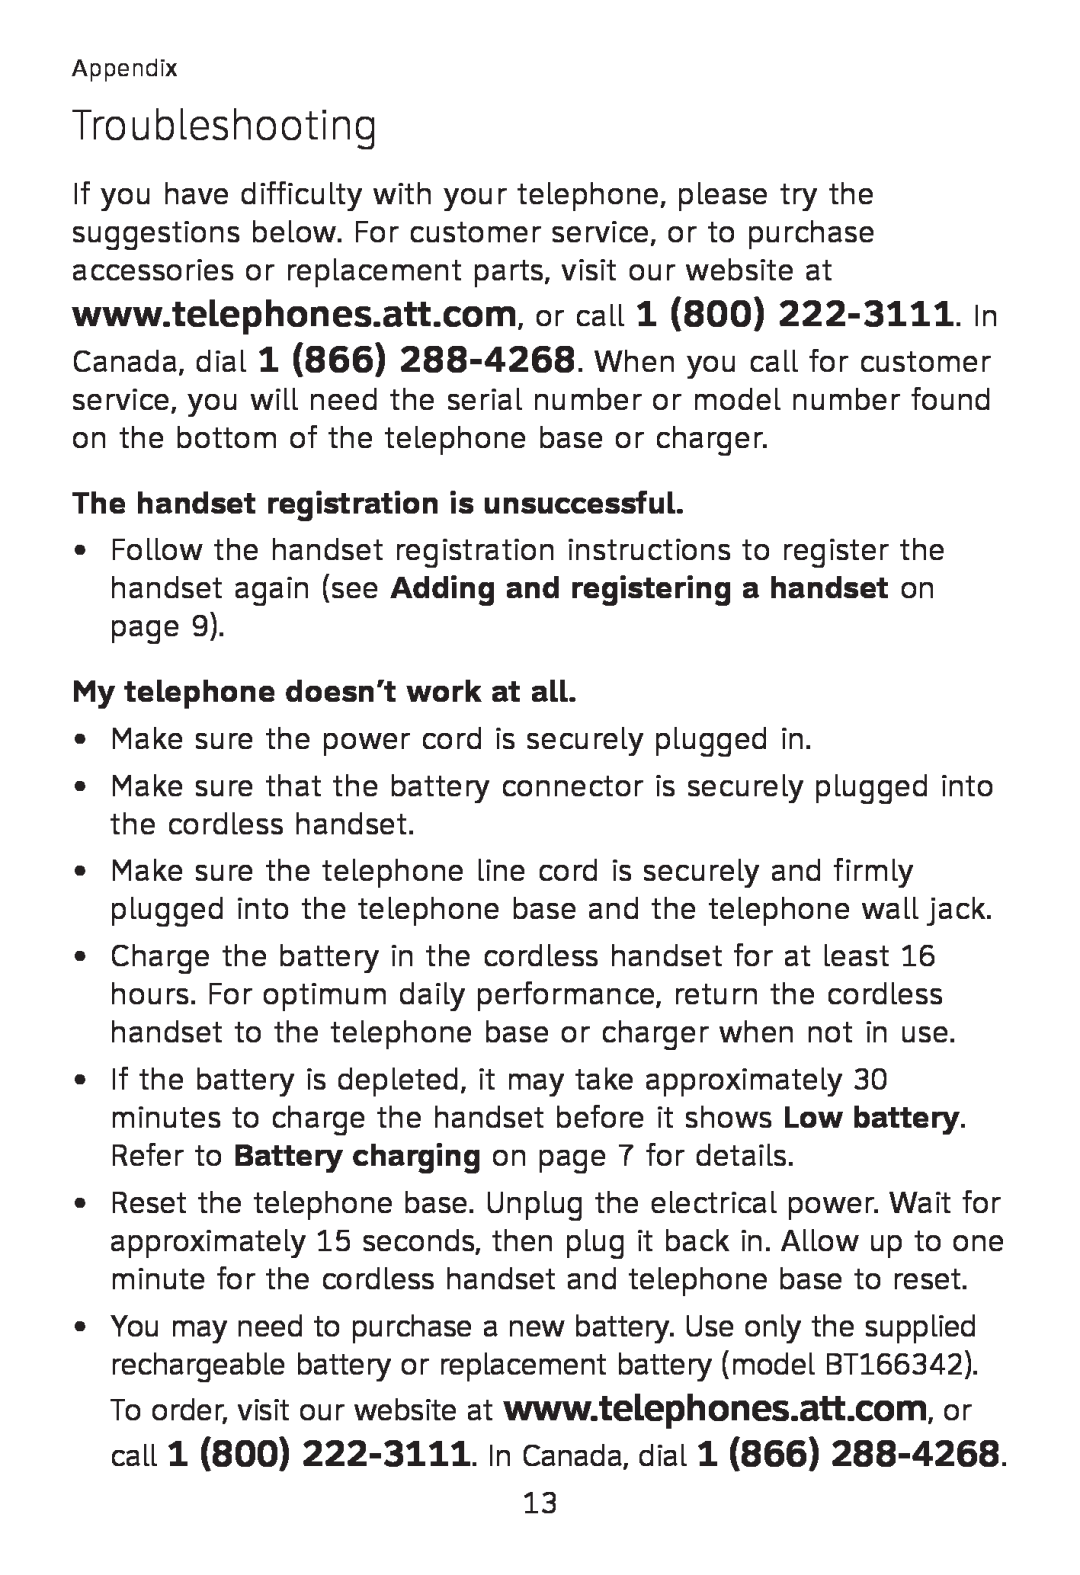 AT&T TL32100, TL32300, TL32200 Troubleshooting, The handset registration is unsuccessful, My telephone doesn’t work at all 